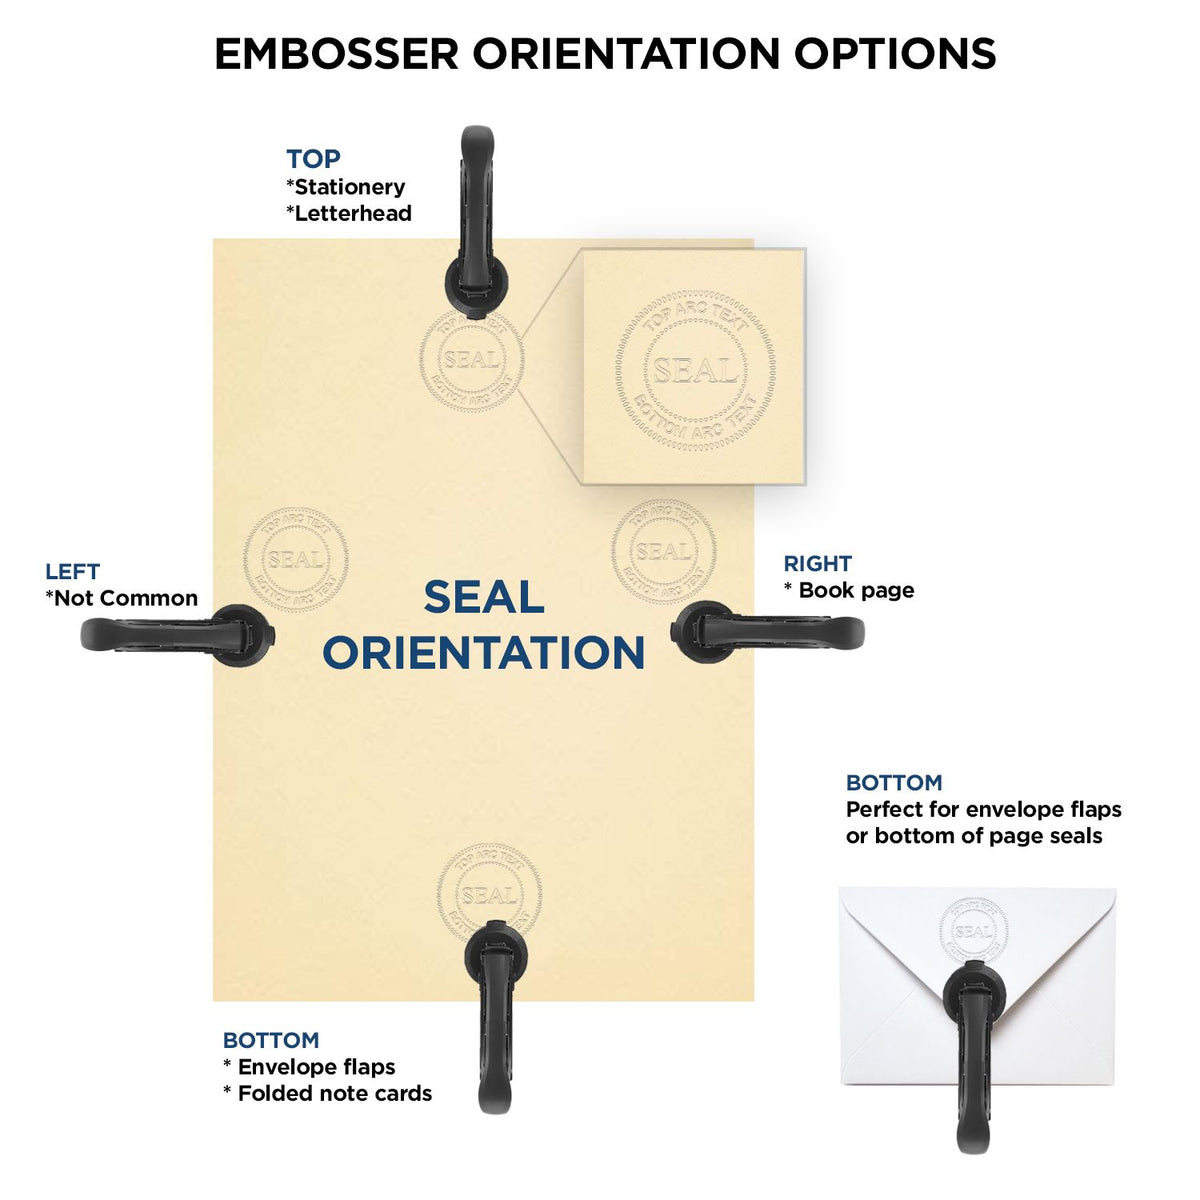 An infographic for the Heavy Duty Cast Iron Nevada Geologist Seal Embosser showing embosser orientation, this is showing examples of a top, bottom, right and left insert.